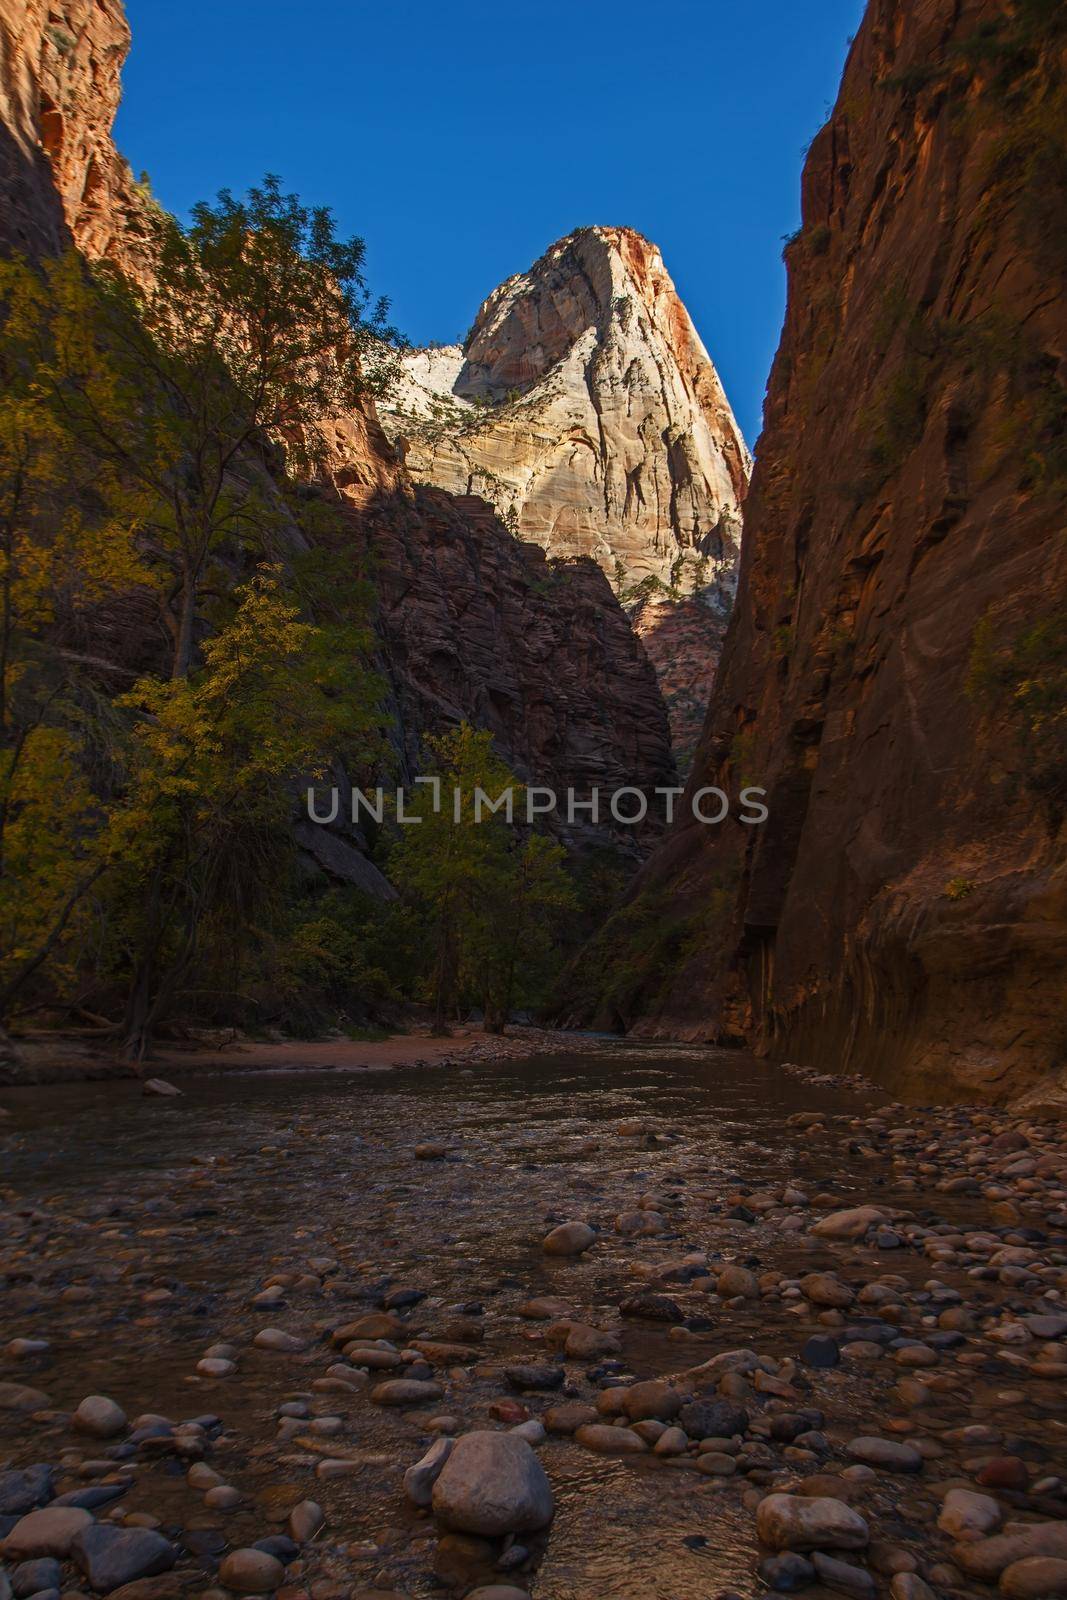 Virgin River Zion National Park 2599 by kobus_peche